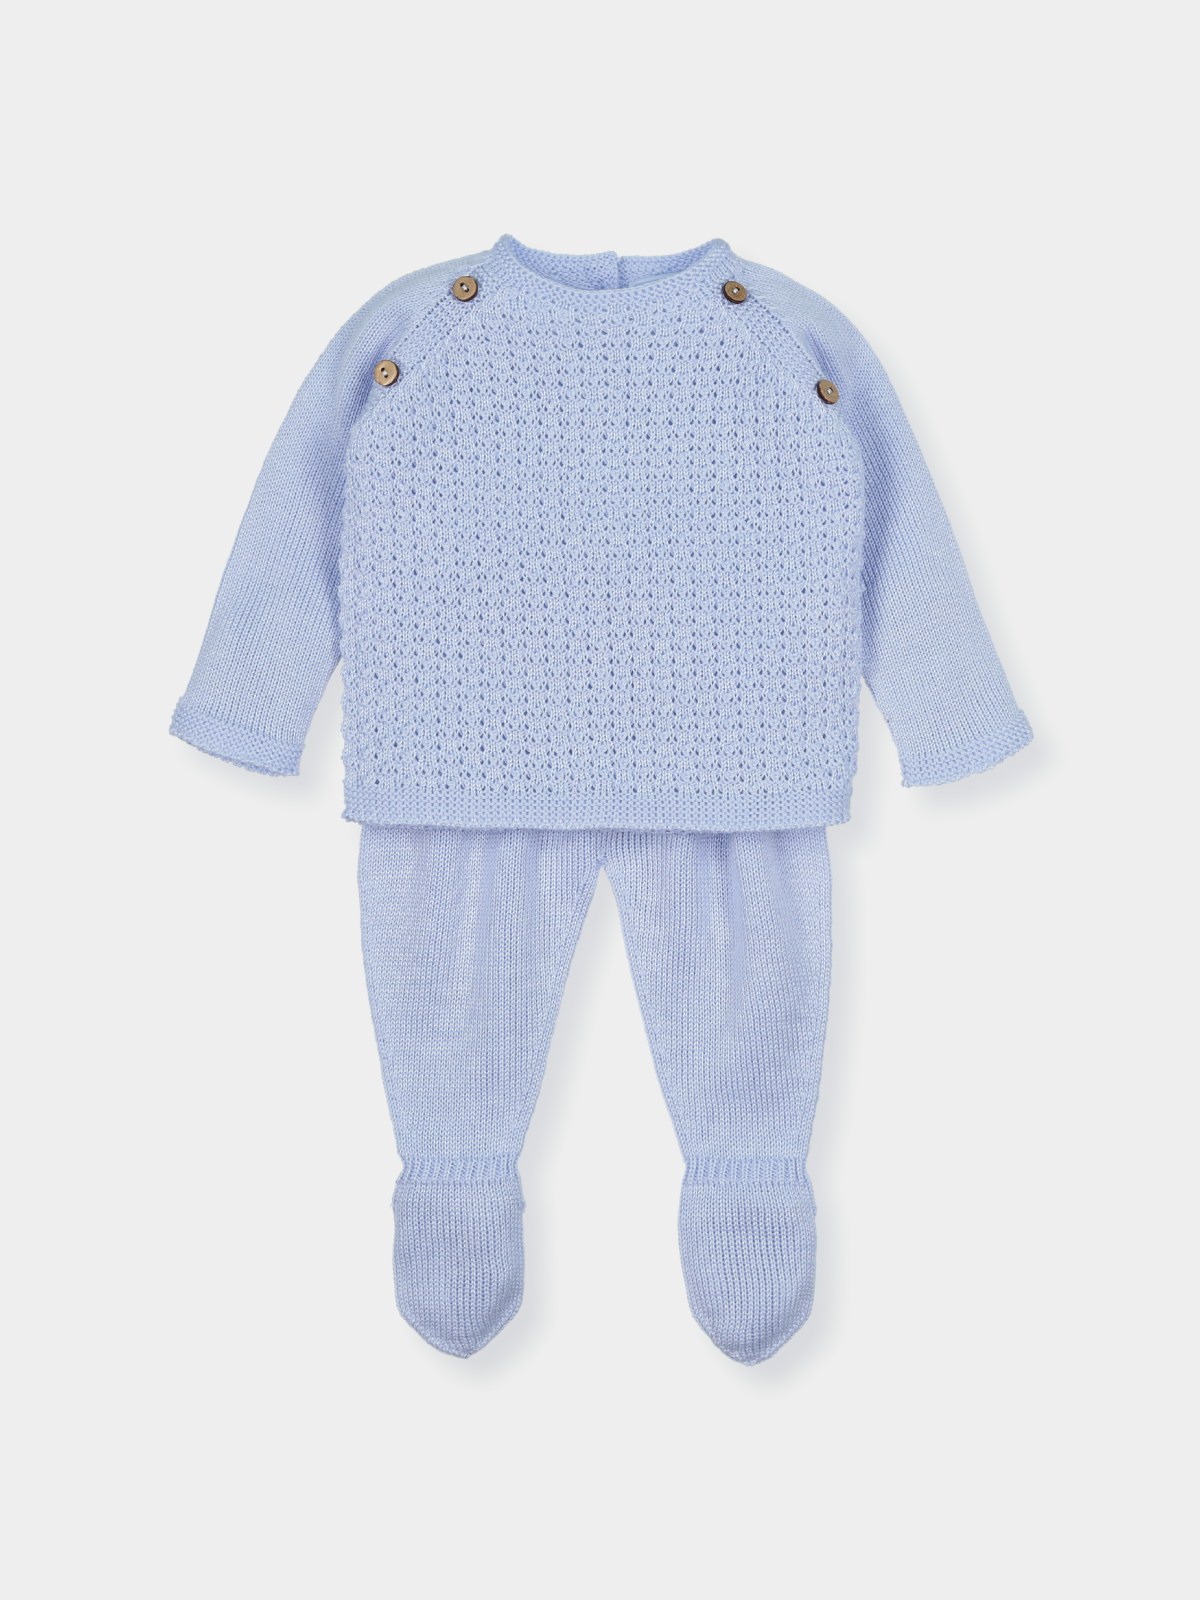 Mac Ilusion | Designer Baby Clothes | Perfect Little Thing